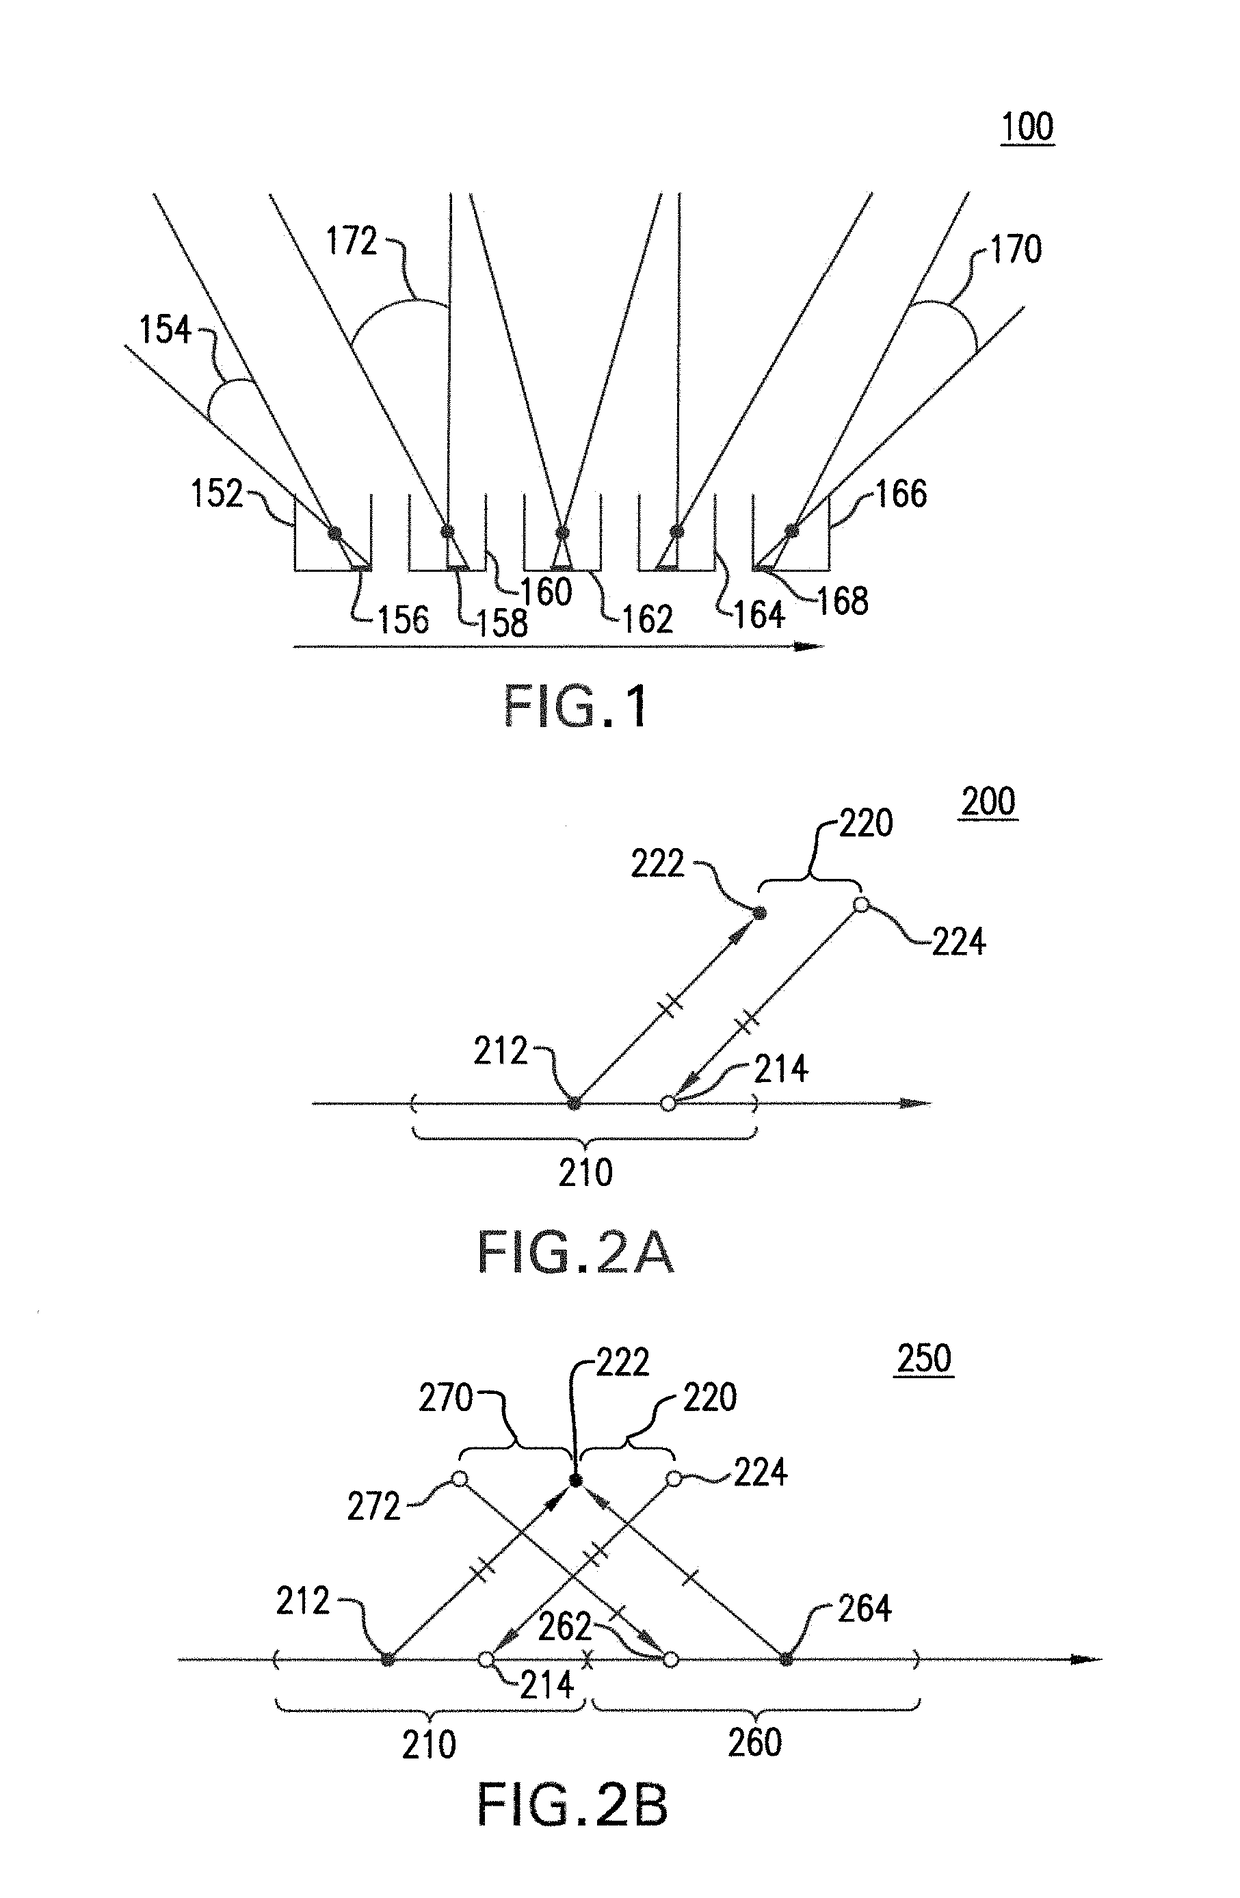 Offset rolling shutter camera model, and applications thereof